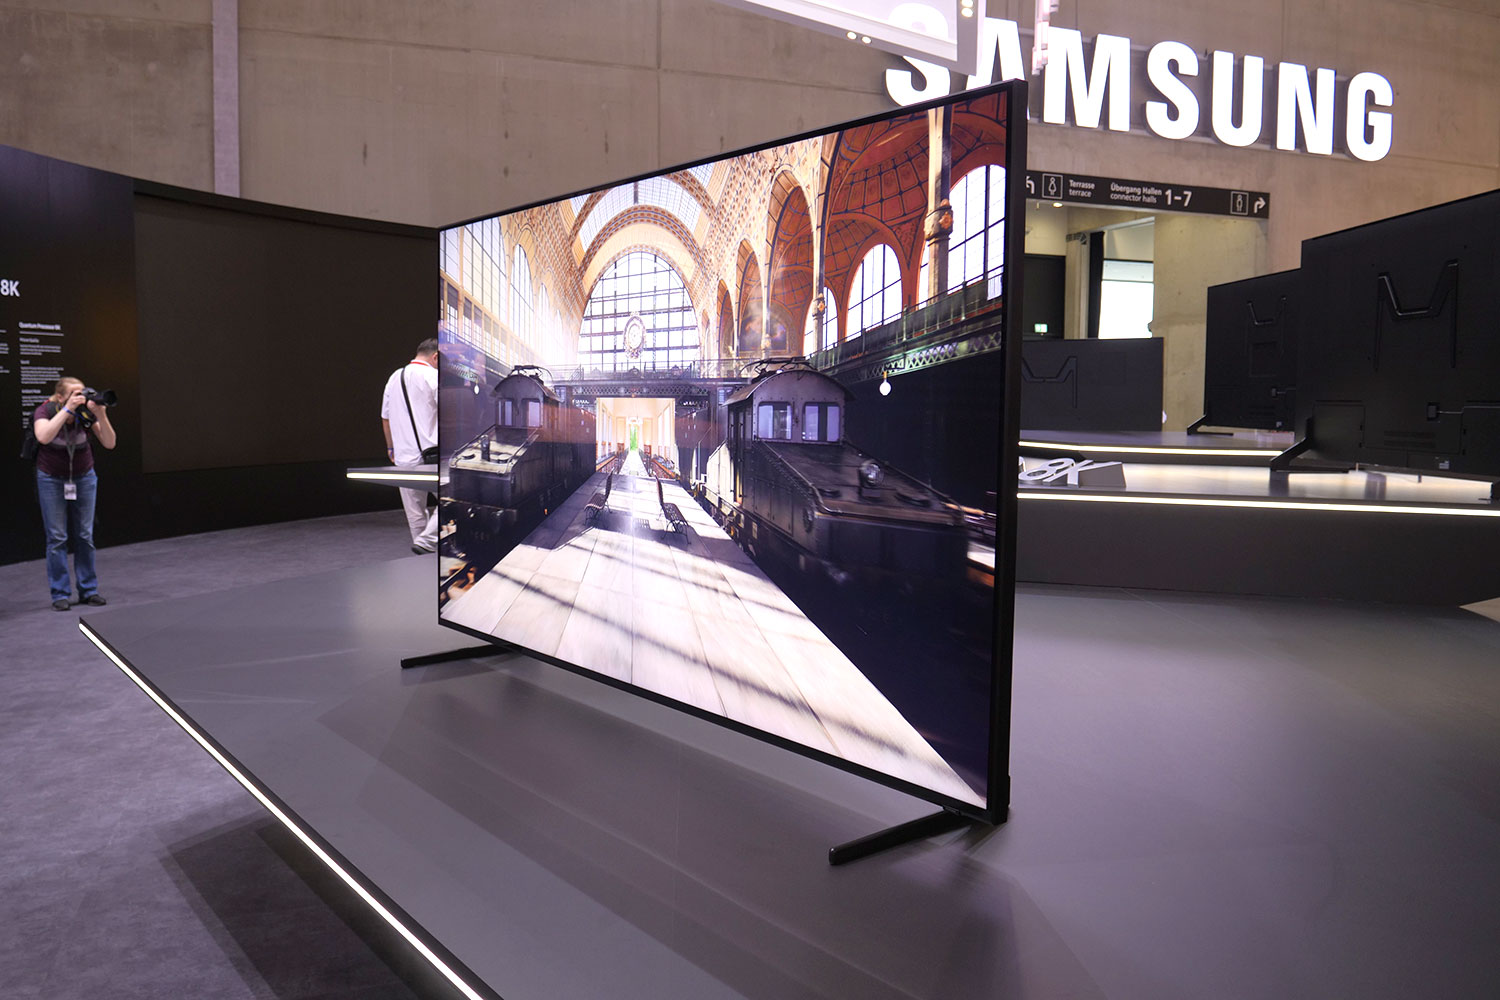 Samsung's 85-inch Q900R 8K QLED Now Available Pre-Order | Digital Trends